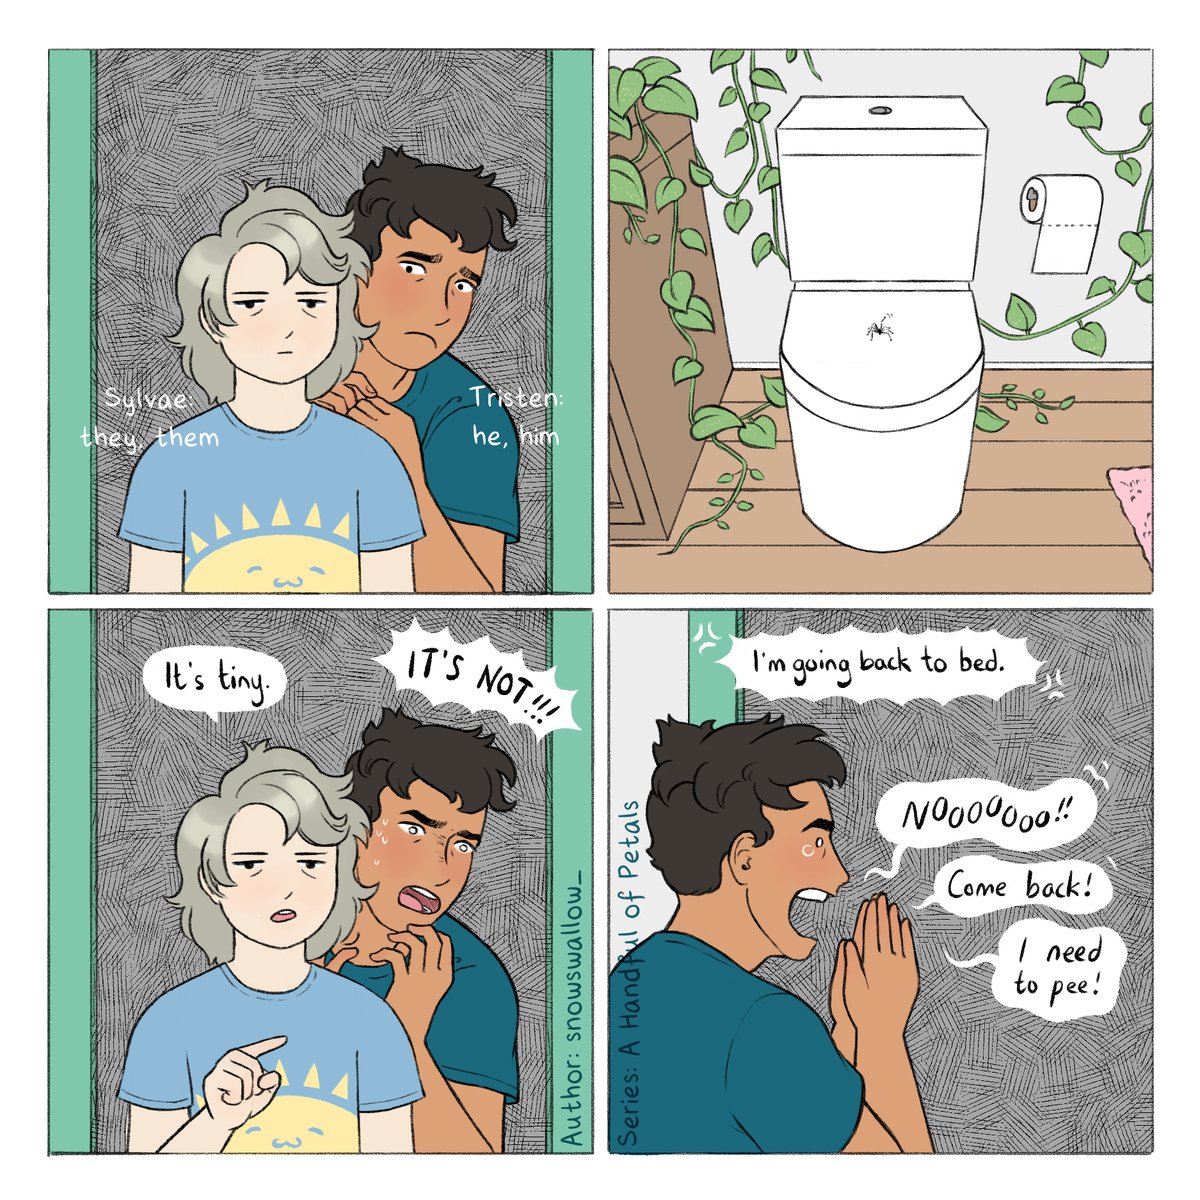 Series: A Handful of Petals
Episode: 5 Bathroom

A Handful of Petals can be found on Tapas and Webtoon and is a slice-of-life series revolving around a forest spirit and their boyfriend. 